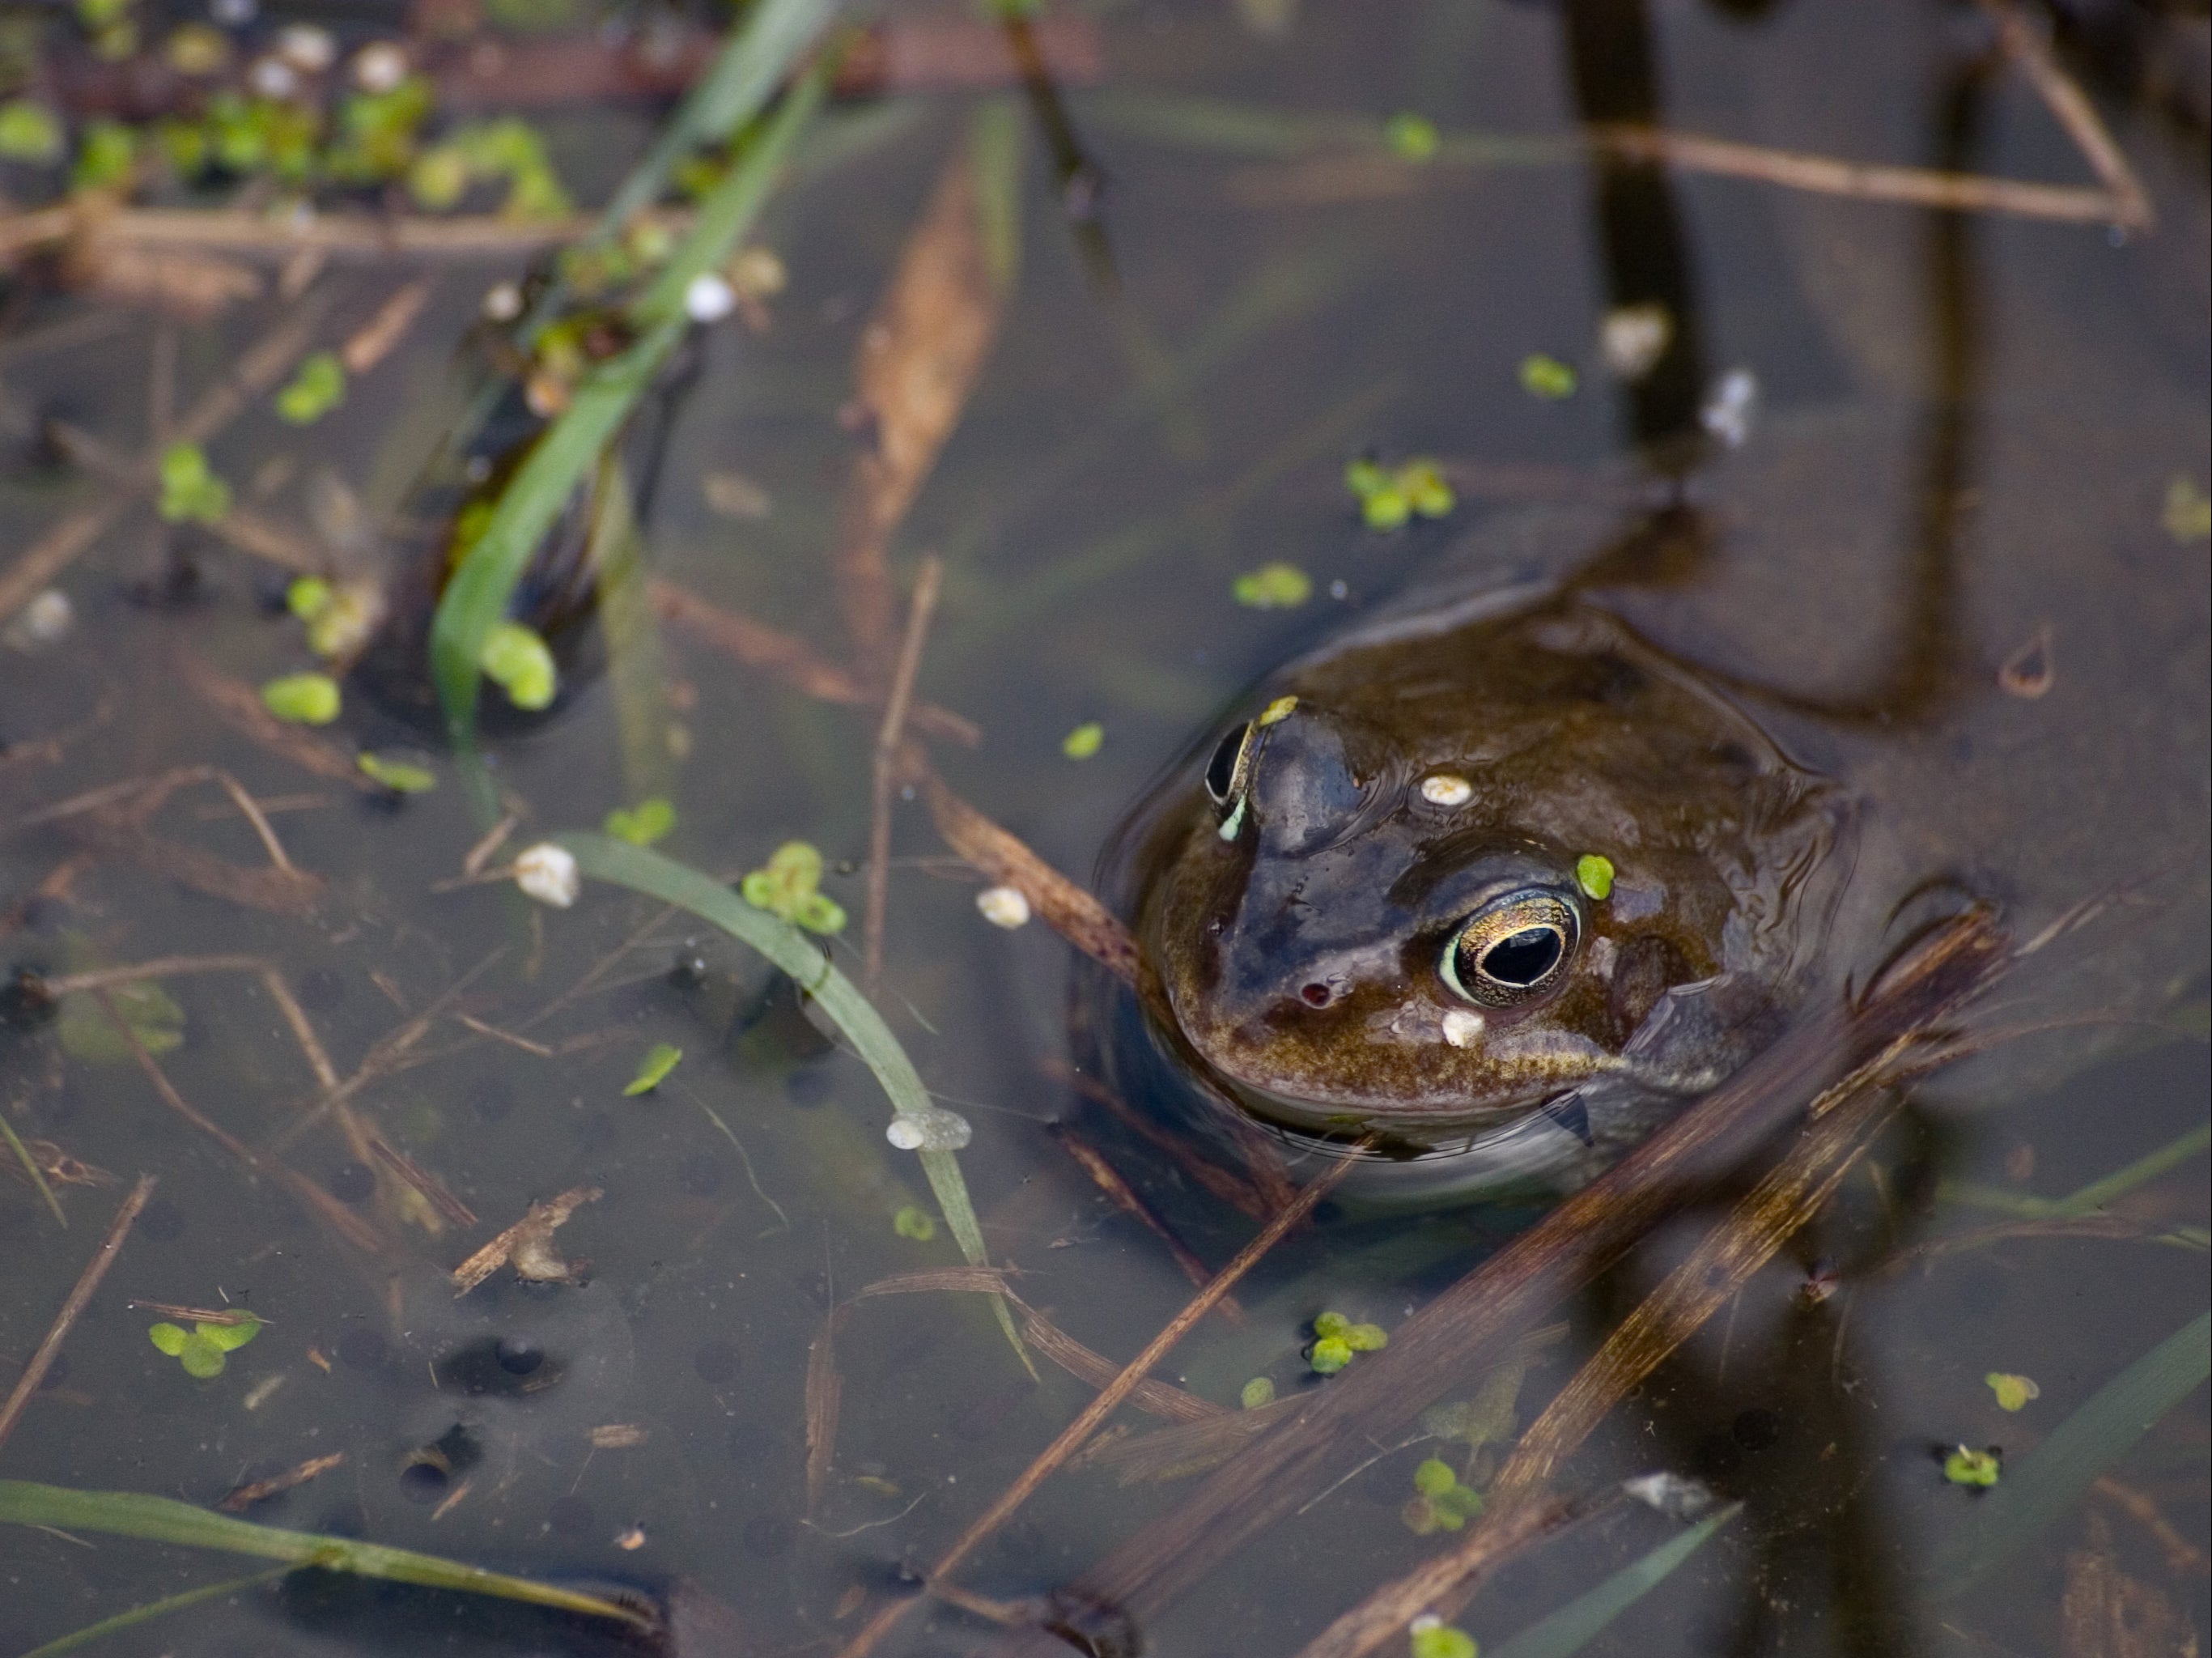 Turning part of your garden into wetland could help support dwindling wildlife populations